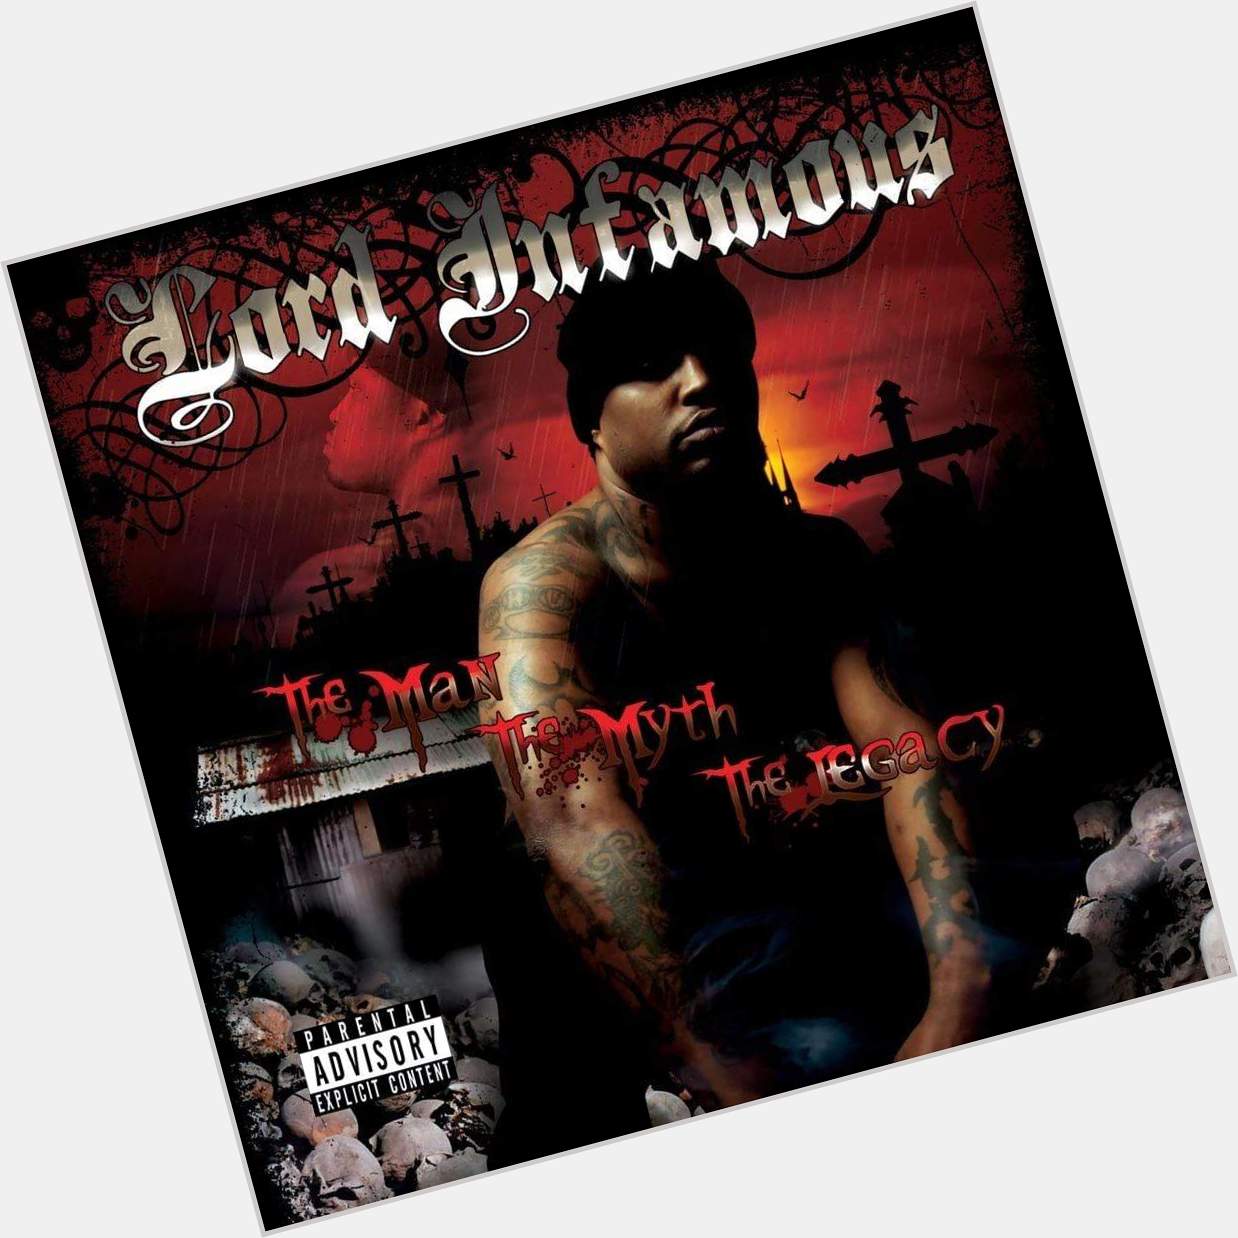 Lord Infamous dating 2